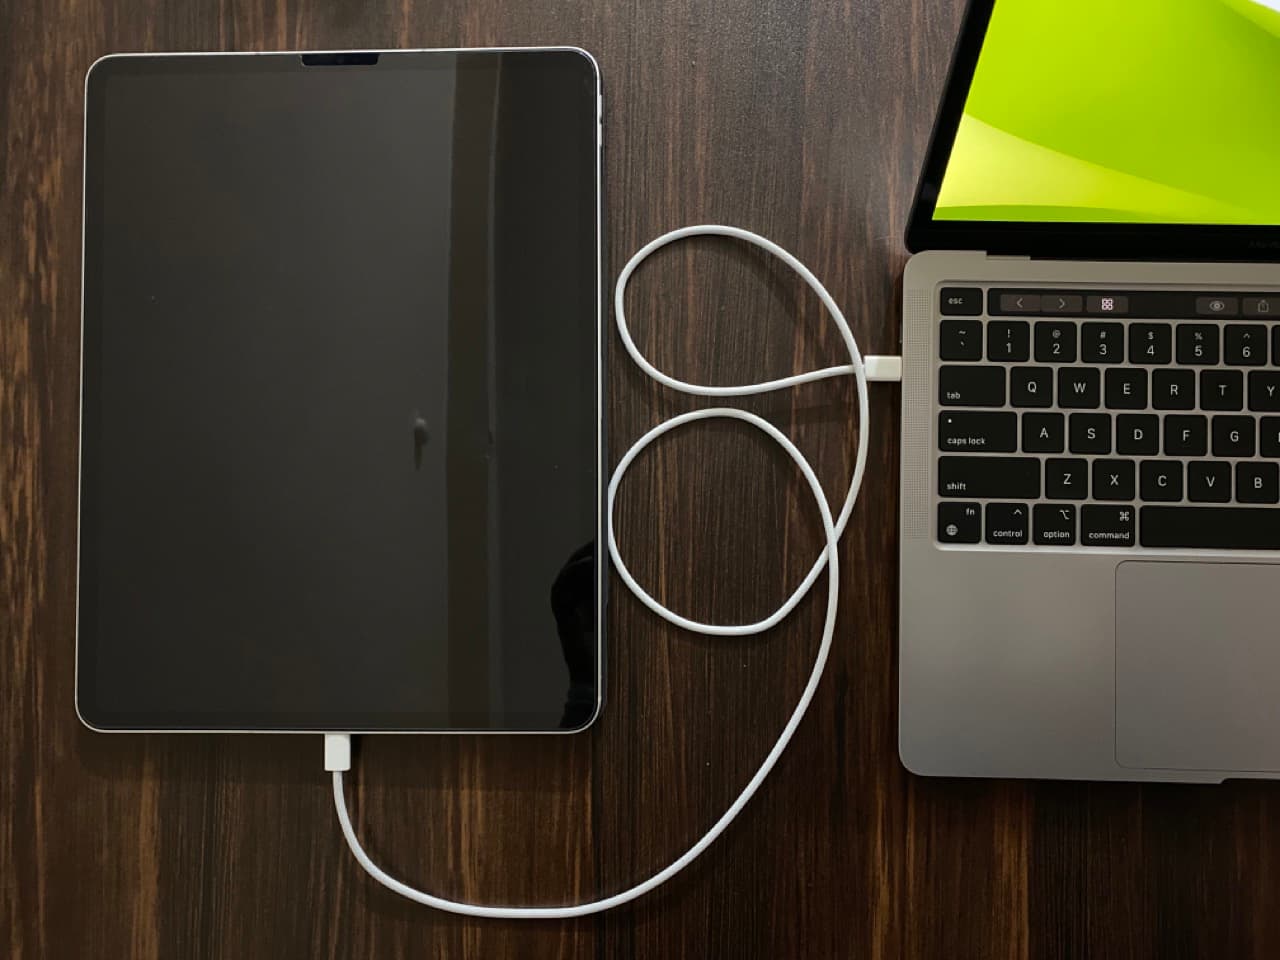 iPad Pro connected to MacBook via USB cable